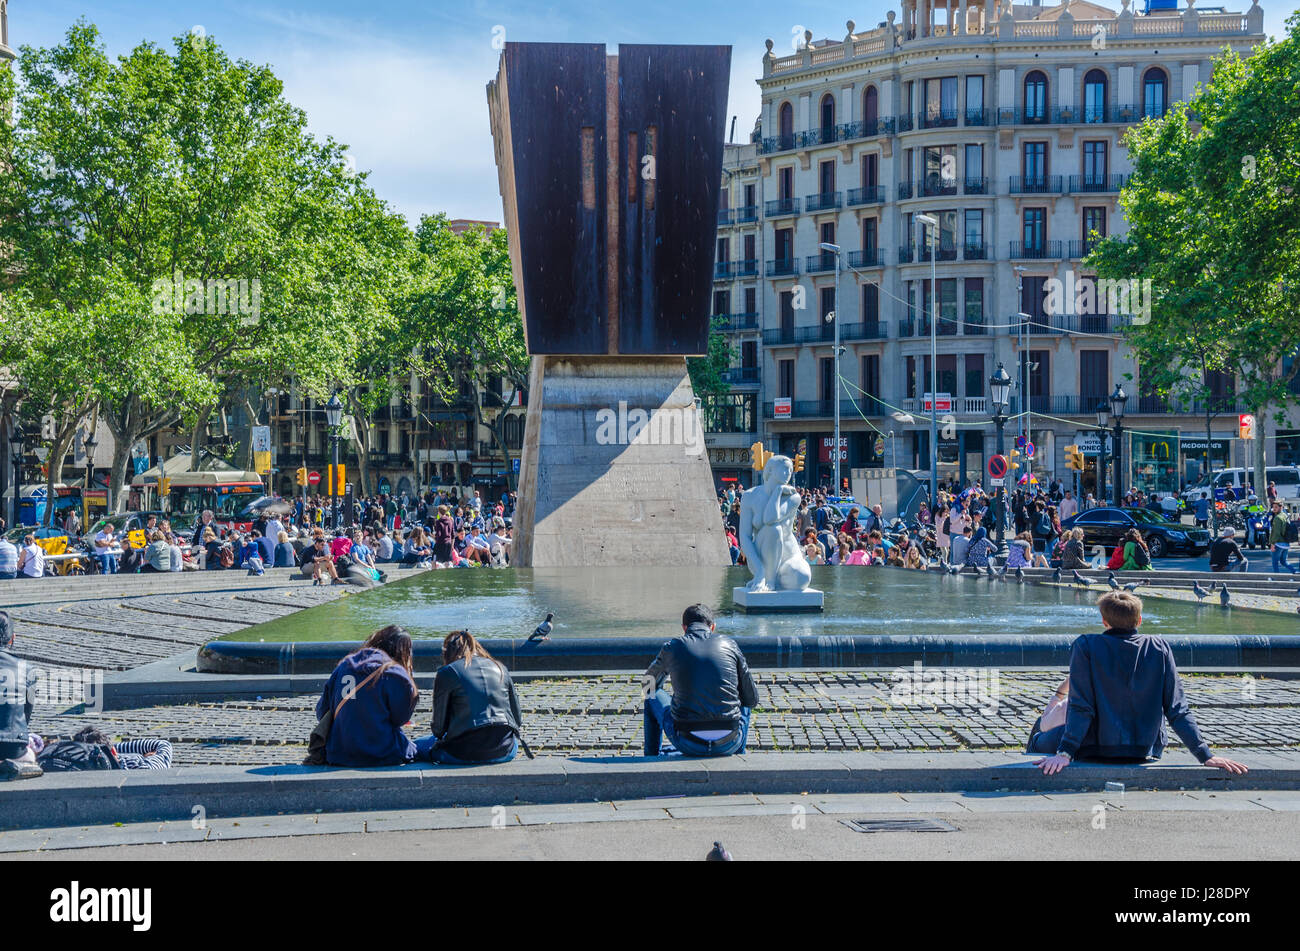 The Placa de Catalunya sits at the heart of Barcelona, surrounded by shops, it boasts fountains and statues. Stock Photo